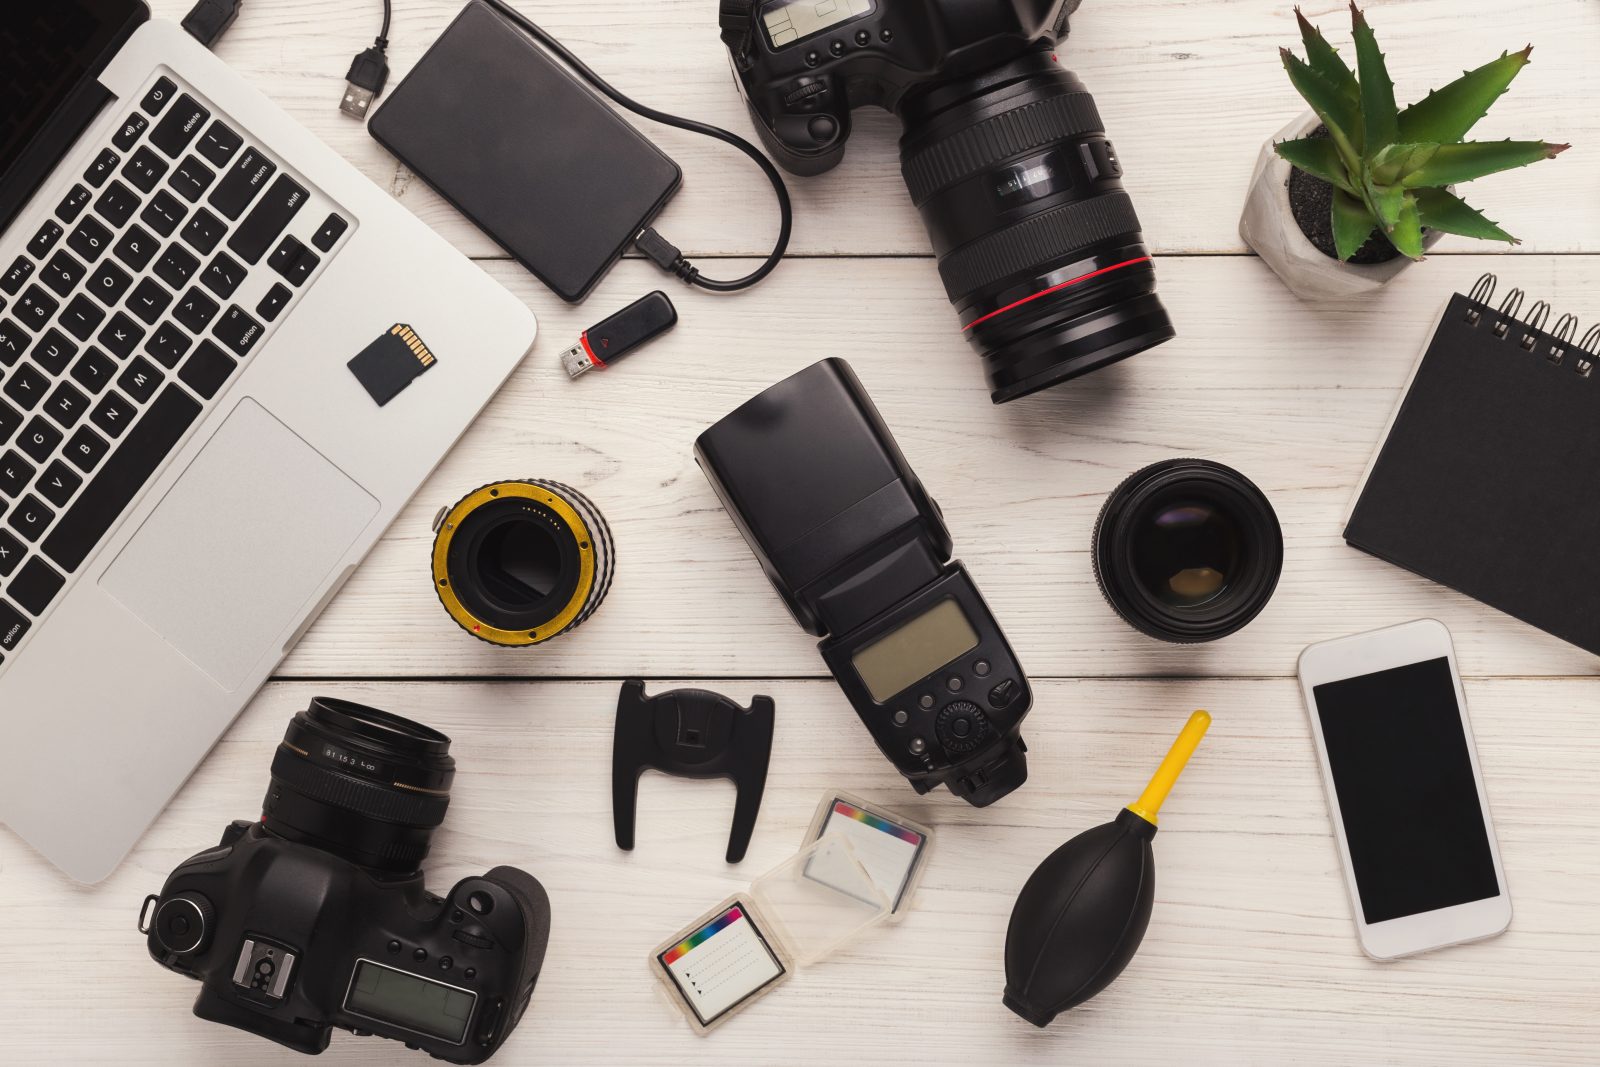 memory cards, dslr cameras, macbook and photography gear lay flat photo